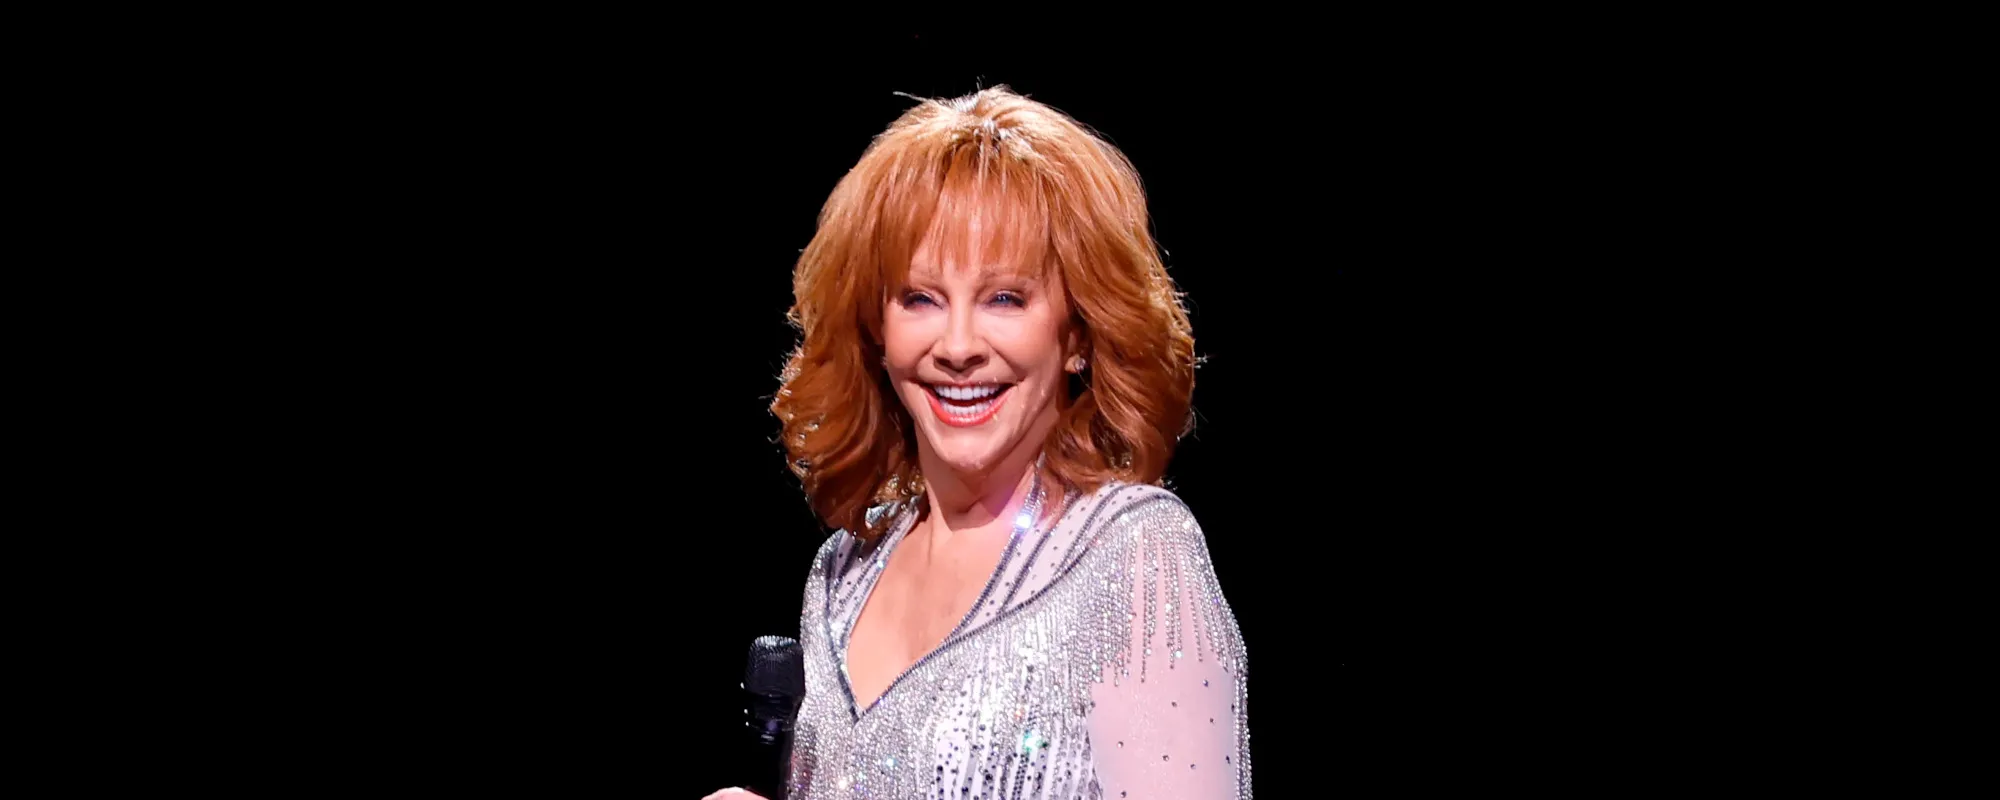 Reba McEntire Says Dolly Parton Is Hard to Contact: “Dolly Does Not Text”